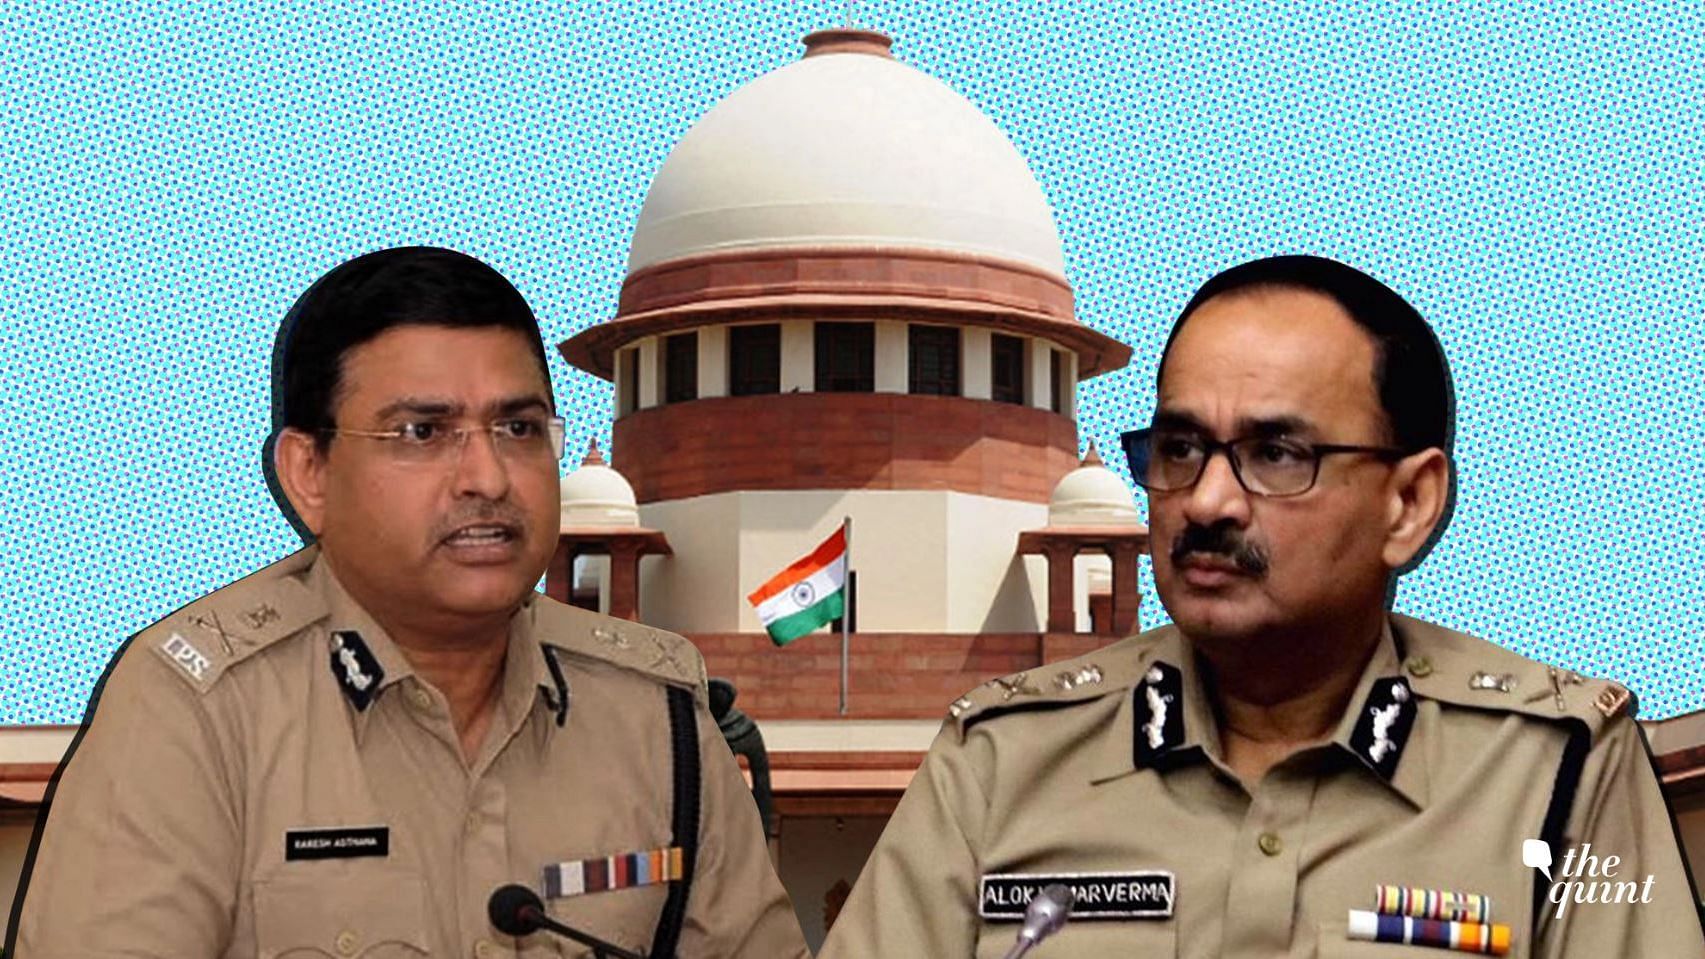 Alok Verma had been stripped of his powers, functions and duties on 23 October 2018.